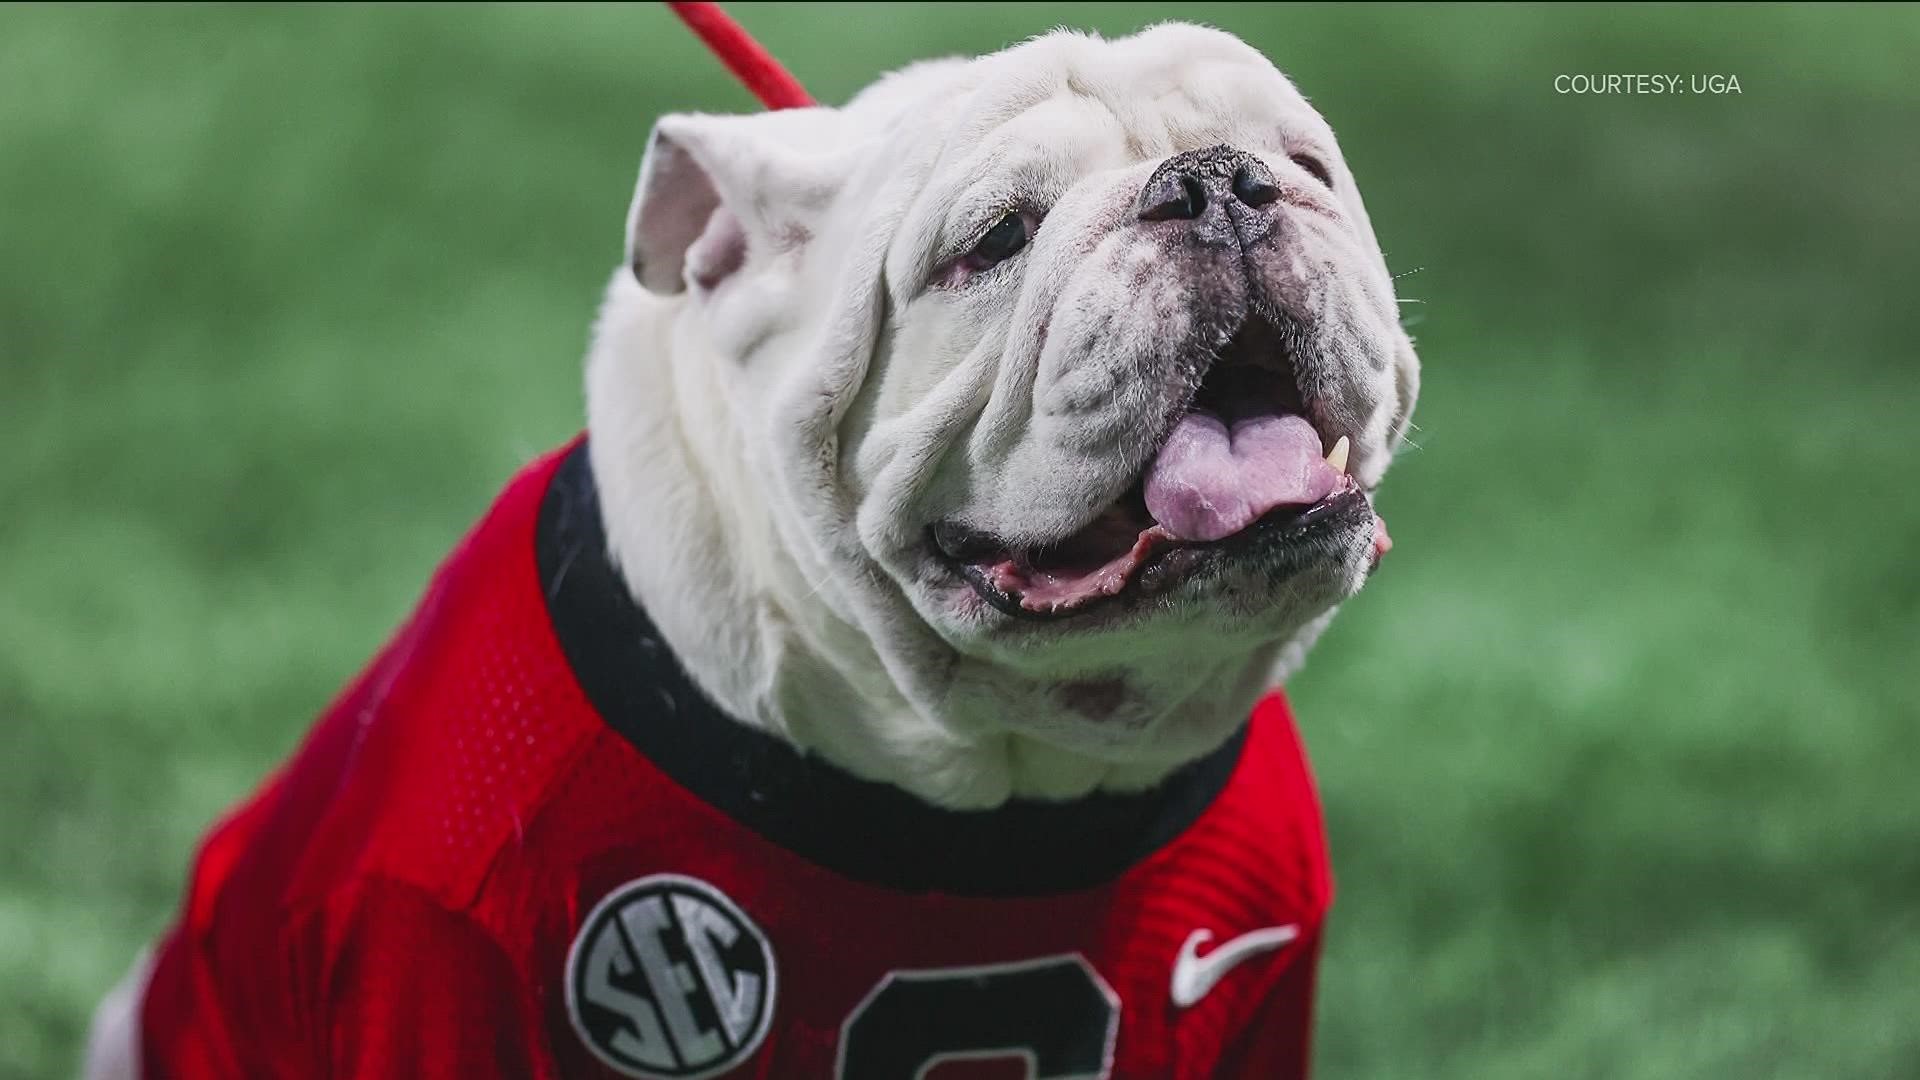 The beloved Georgia Bulldogs mascot will not be at the game.